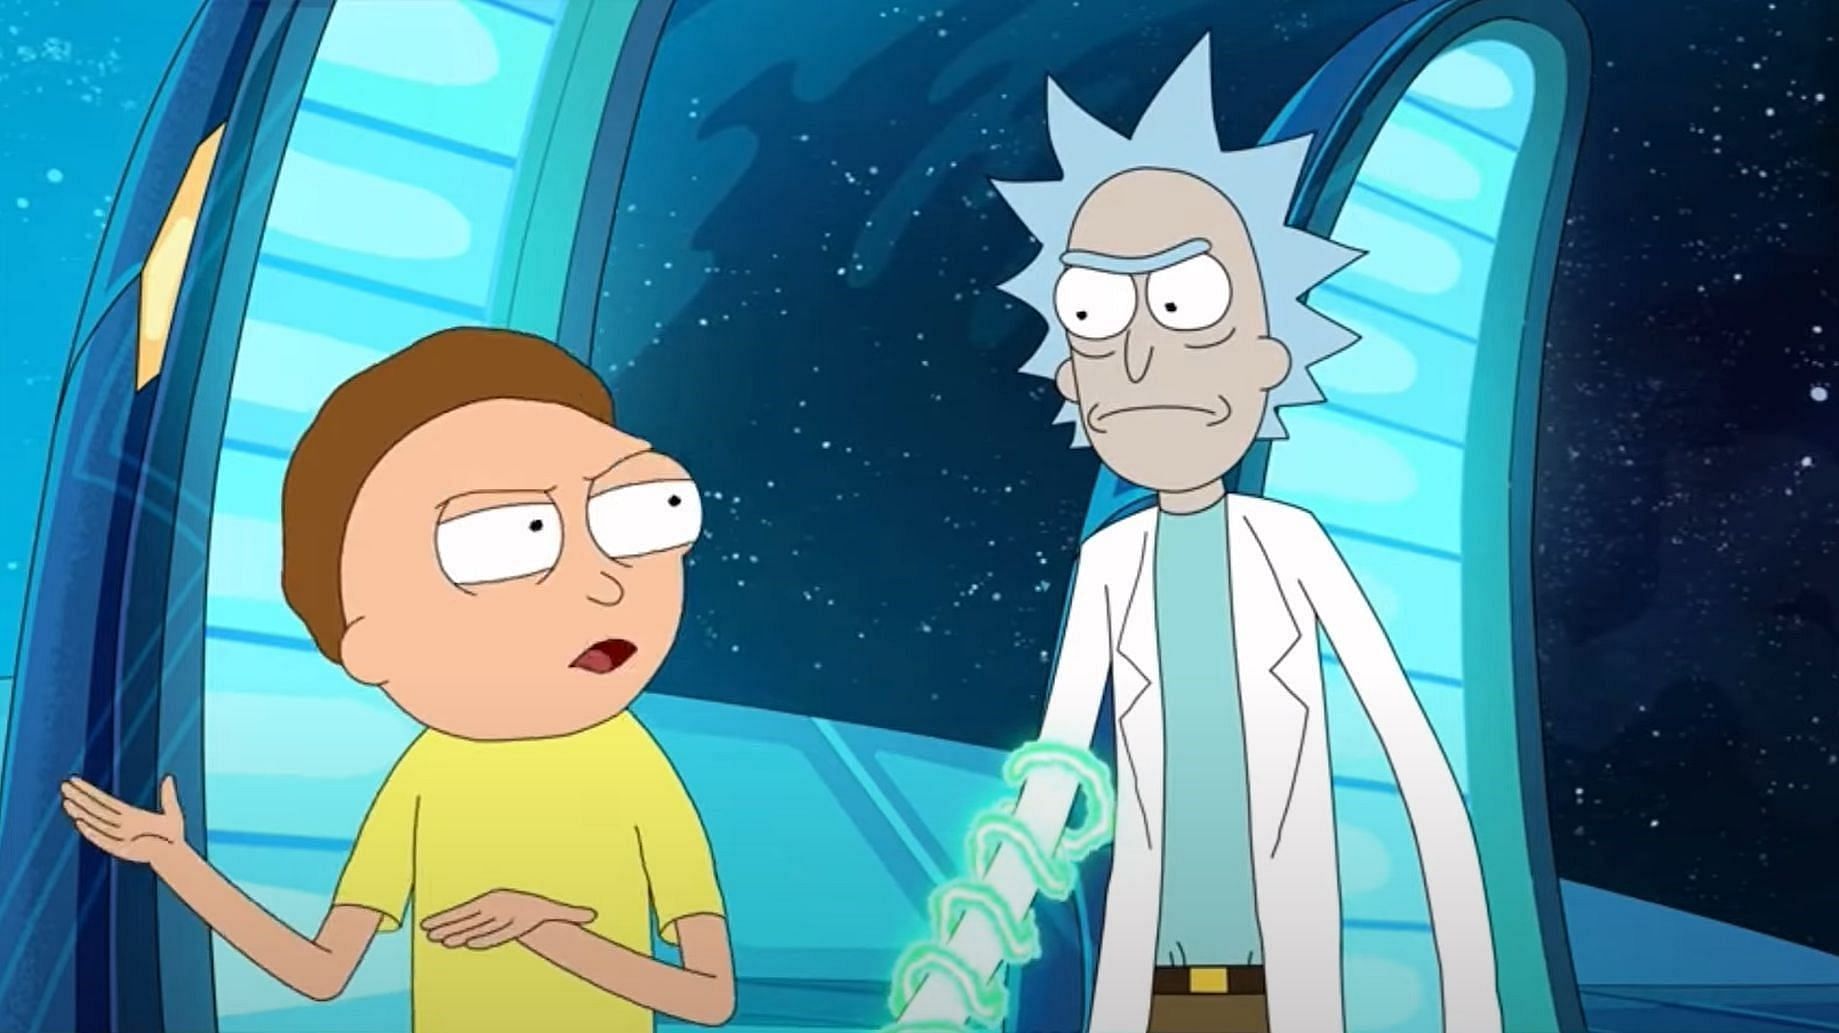 How to Watch 'Rick and Morty' Season 5 Episode 2 Online Free